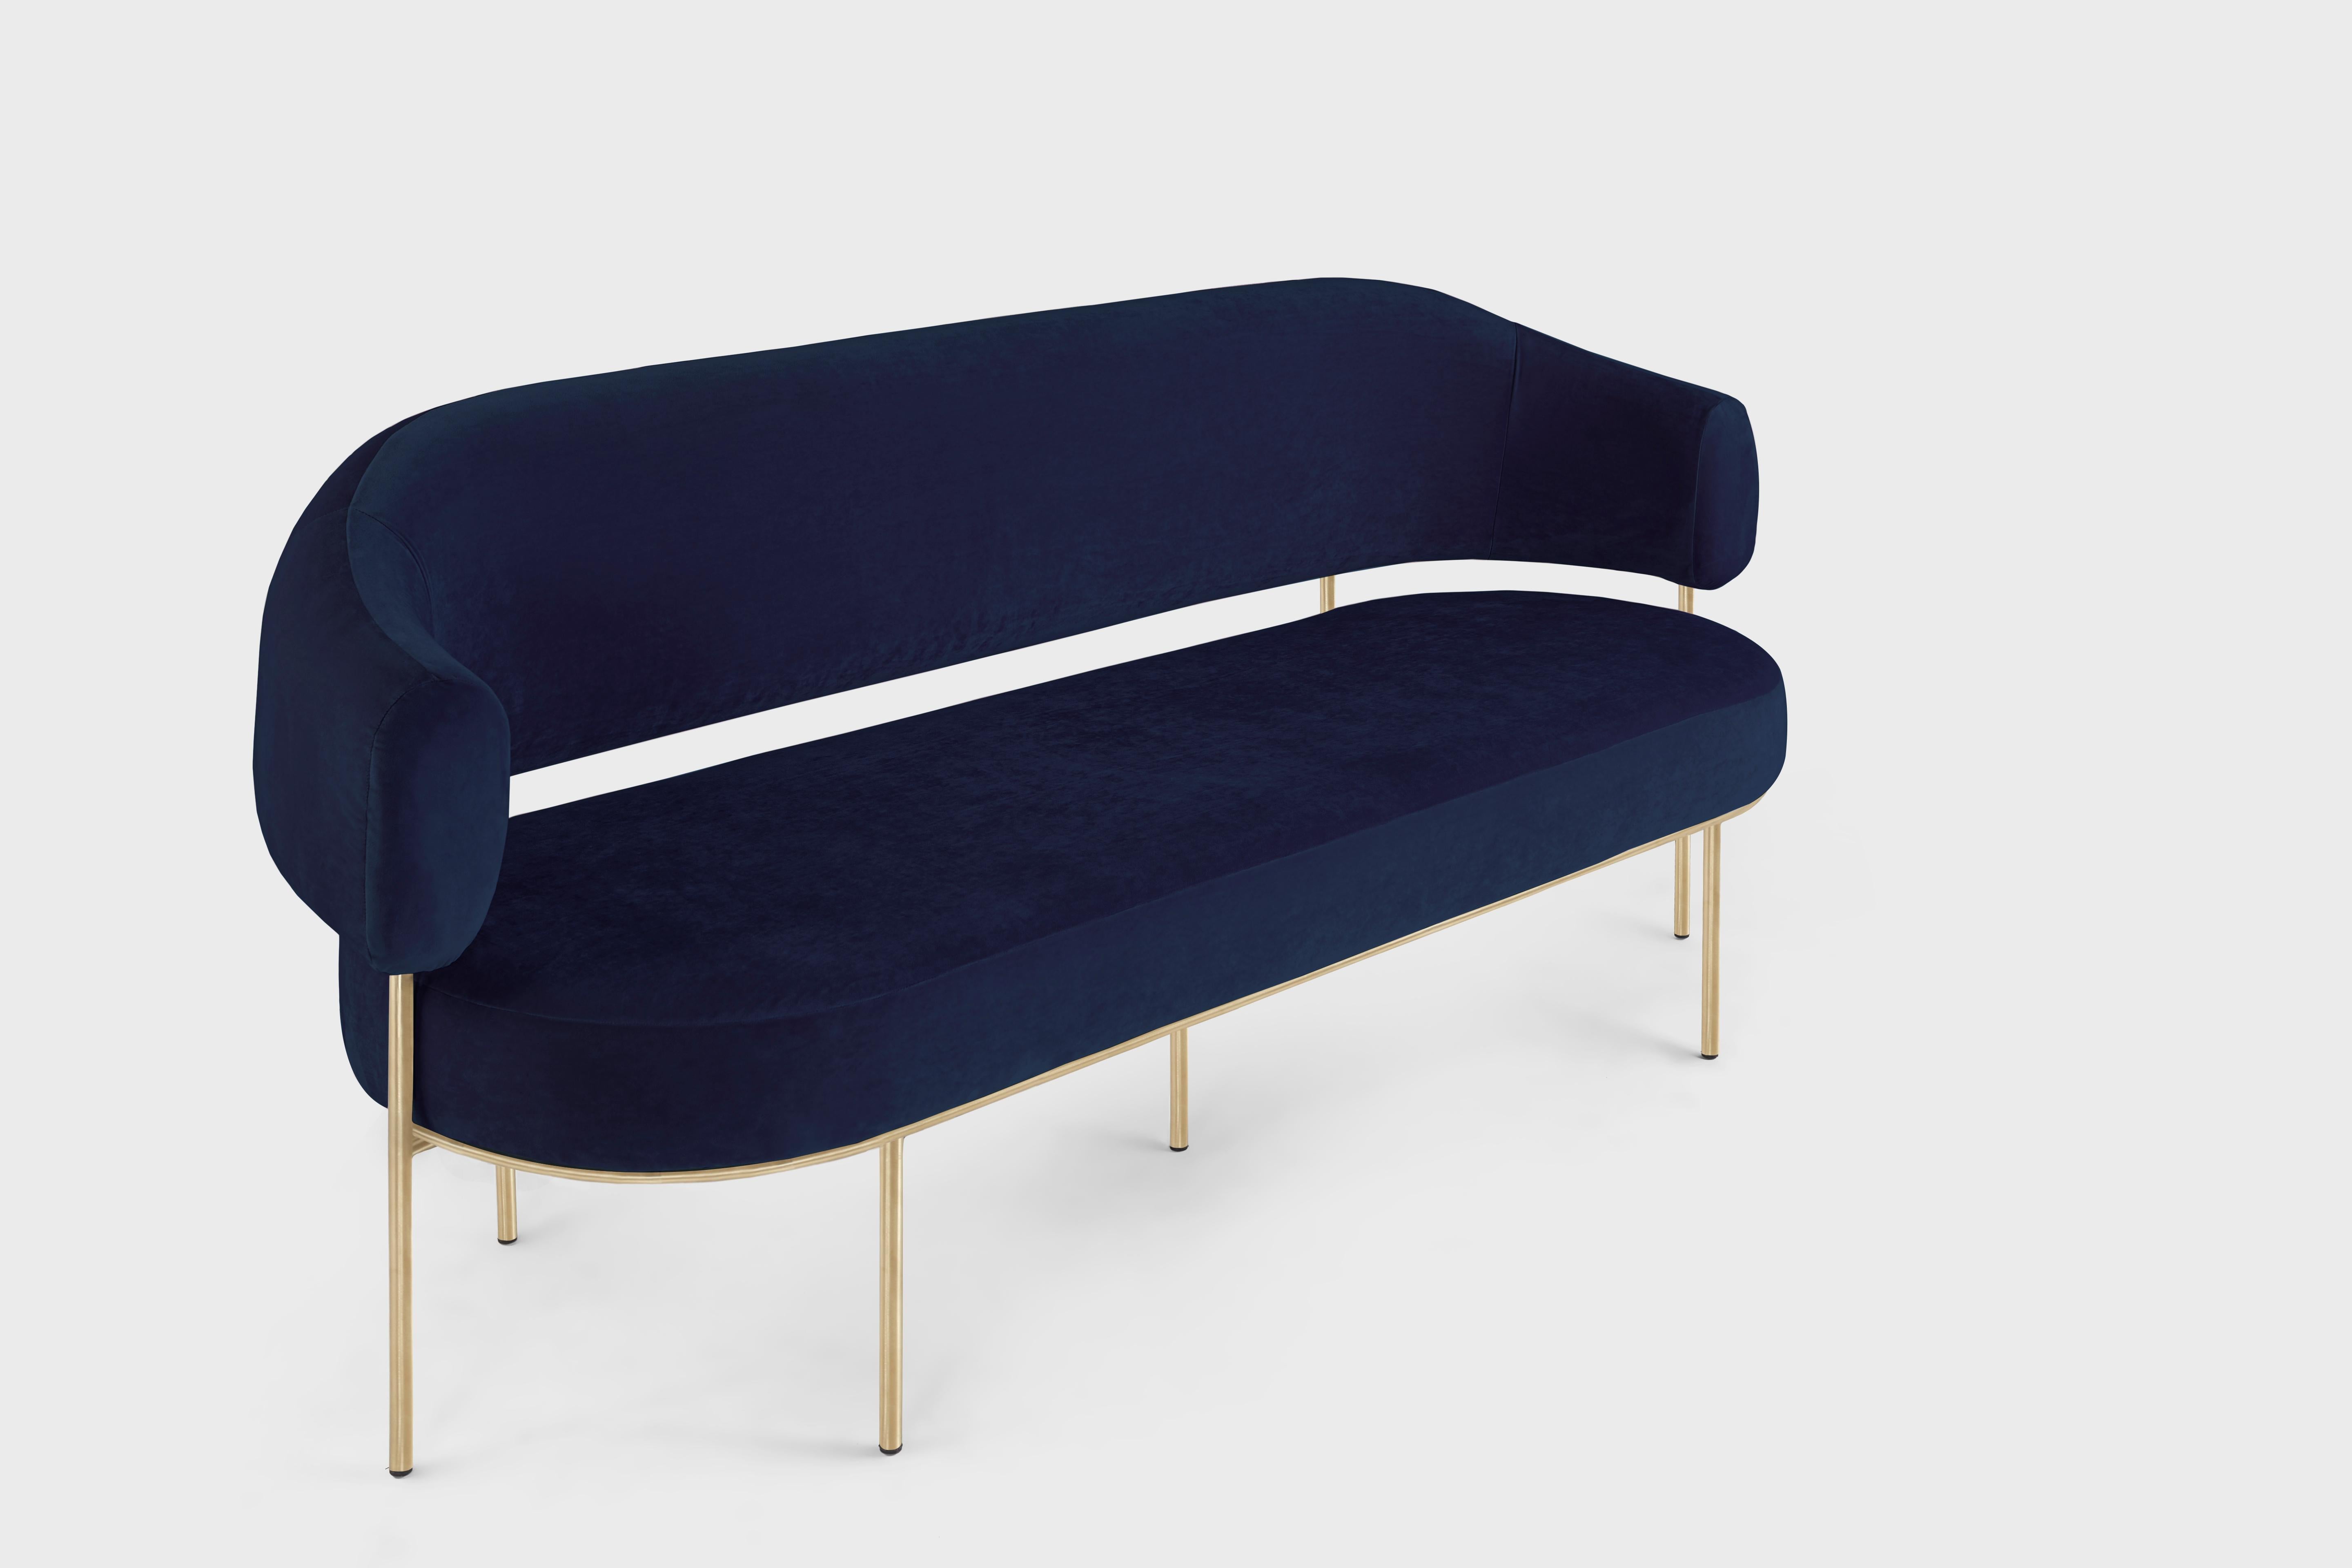 Unique Gold Krest sofa by Hatsu
Dimensions: D 67 x W 192 x H 912 cm 
Materials: Uphostered seating on powdercoated steel frame

Hatsu is a design studio based in Mumbai that creates modern lighting that are unique and immediately recognisable.